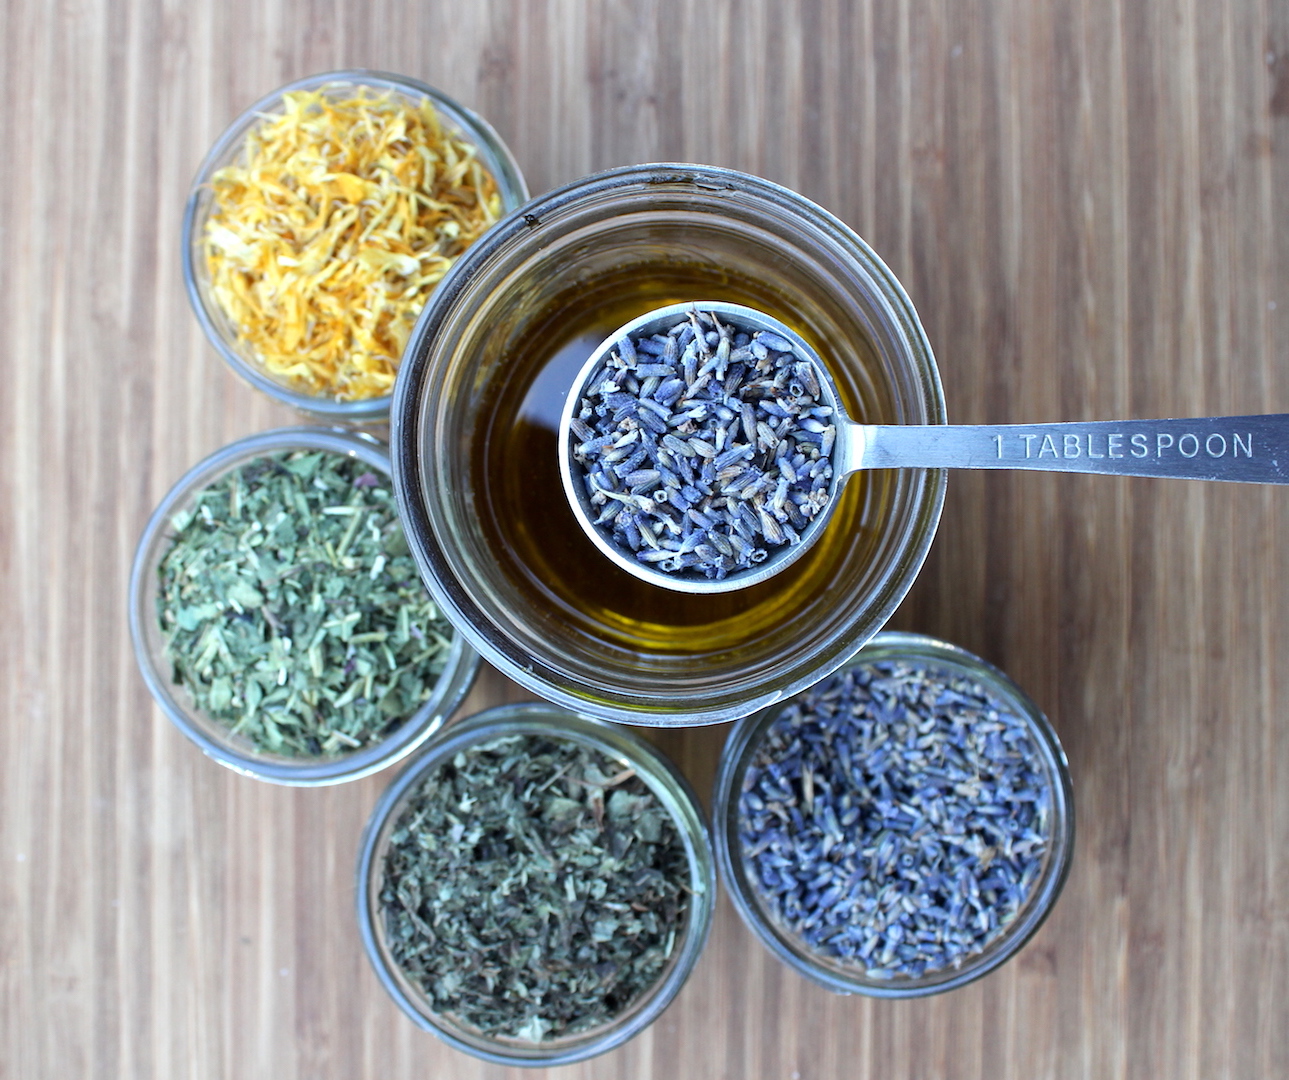 How to Make a Herbal Infused Oil